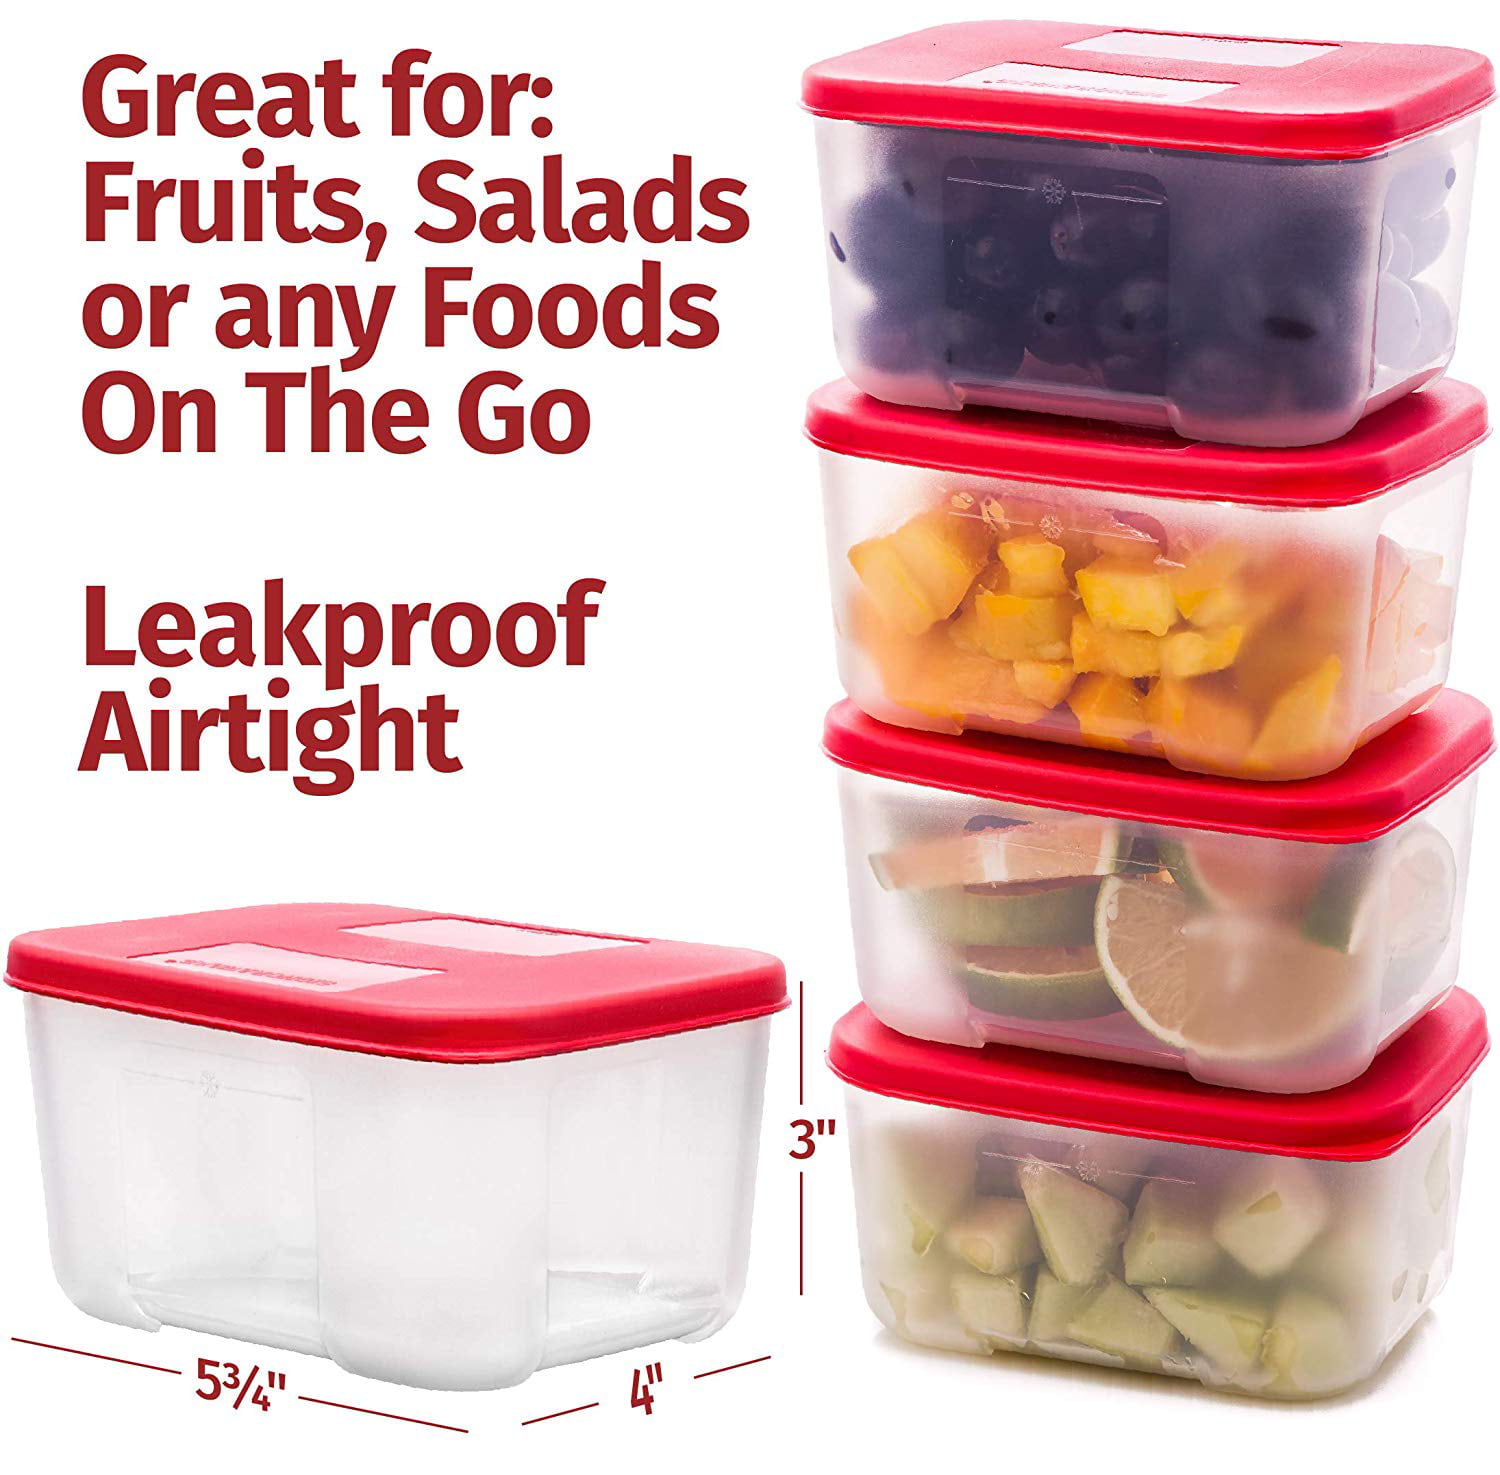 60 Pcs Food Storage Containers with Lids Airtight-75 OZ to 1.2 OZ(30  Containers & 30 Lids) 100% Leakproof Clear Plastic Freezer Containers